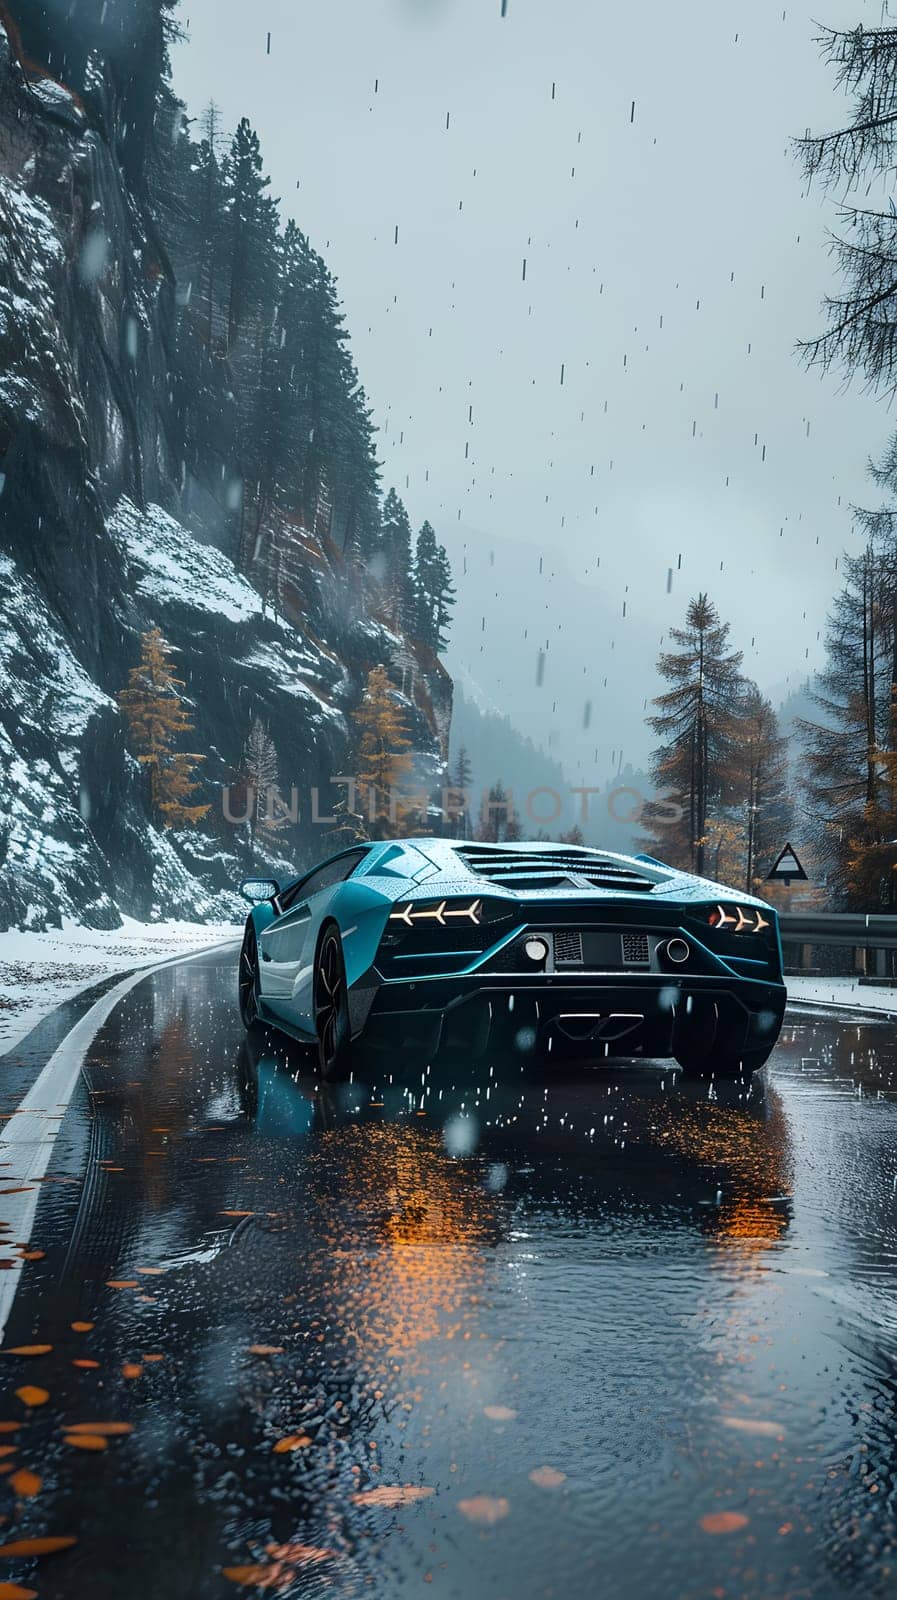 Blue Lamborghini Aventador driving on snowy mountain road by Nadtochiy